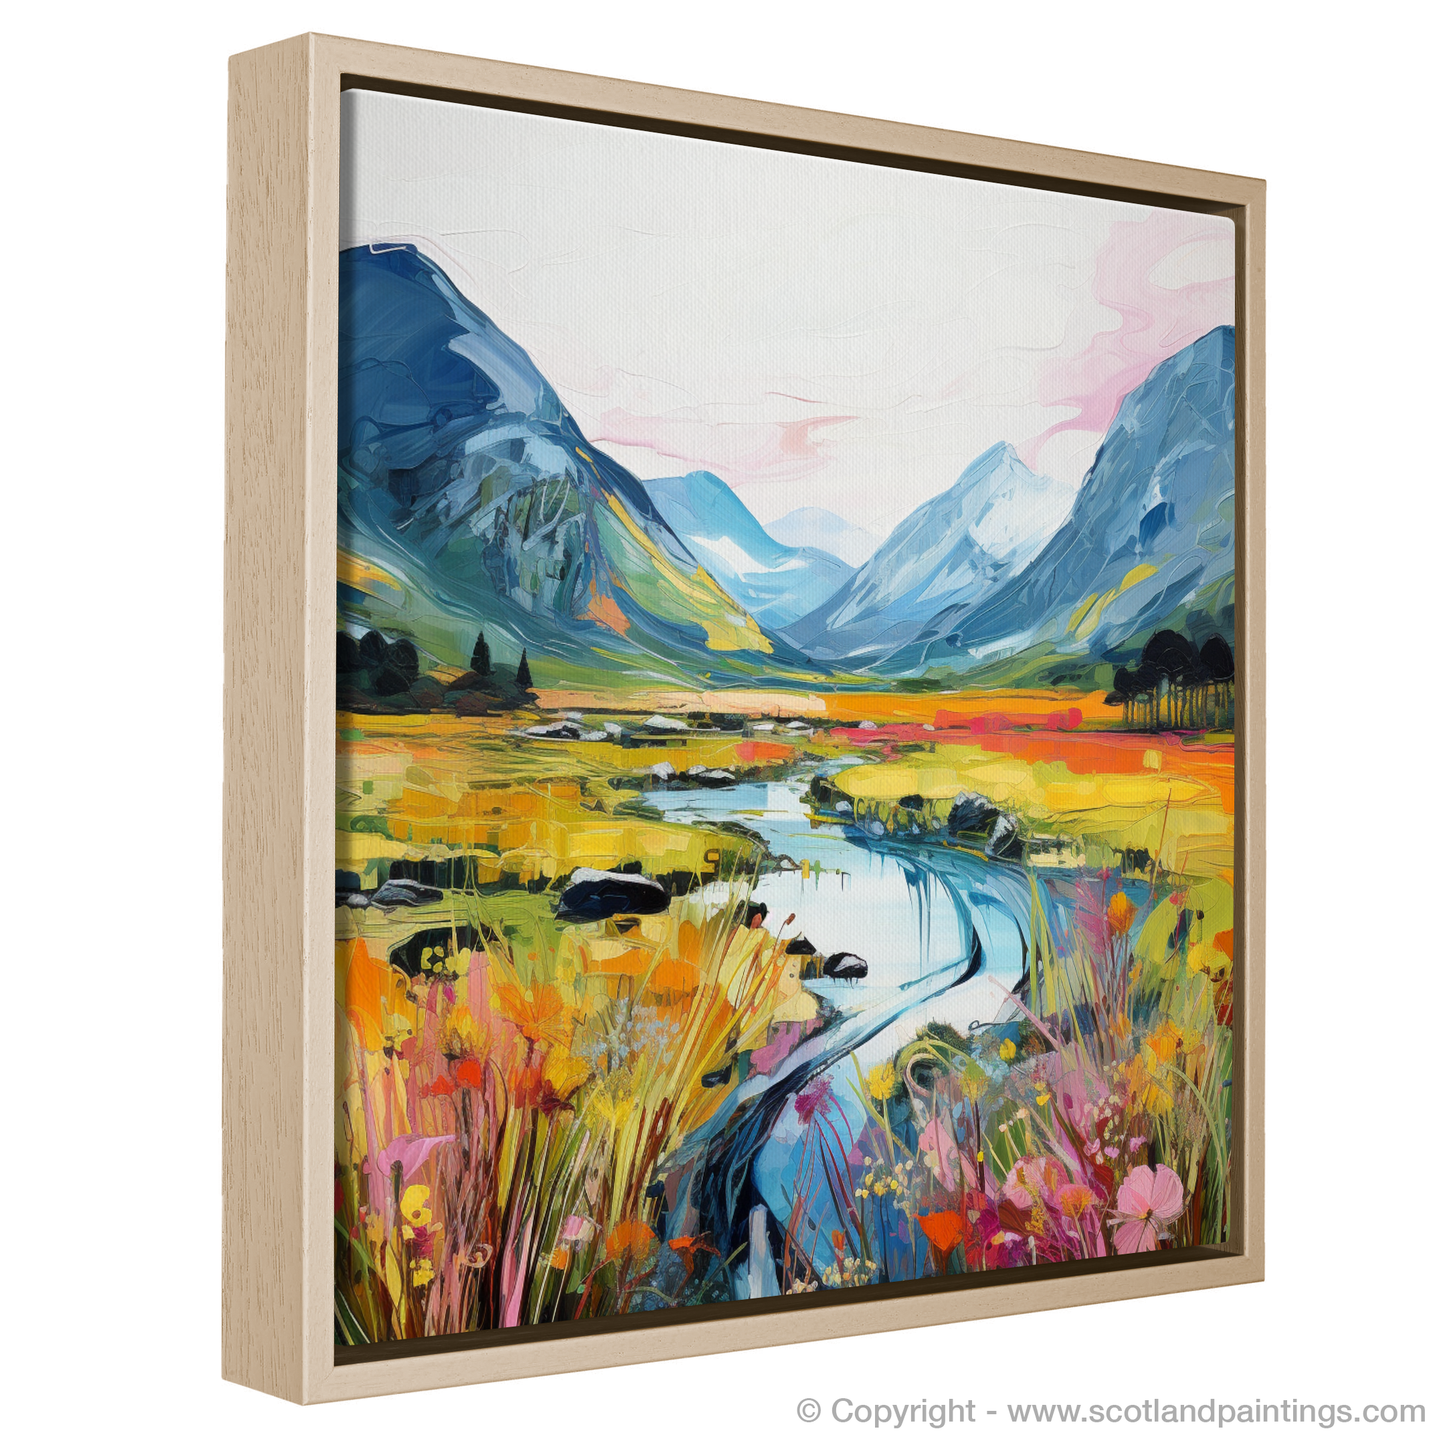 Painting and Art Print of Glen Coe, Highlands in summer entitled "Summer Embrace of Glen Coe".